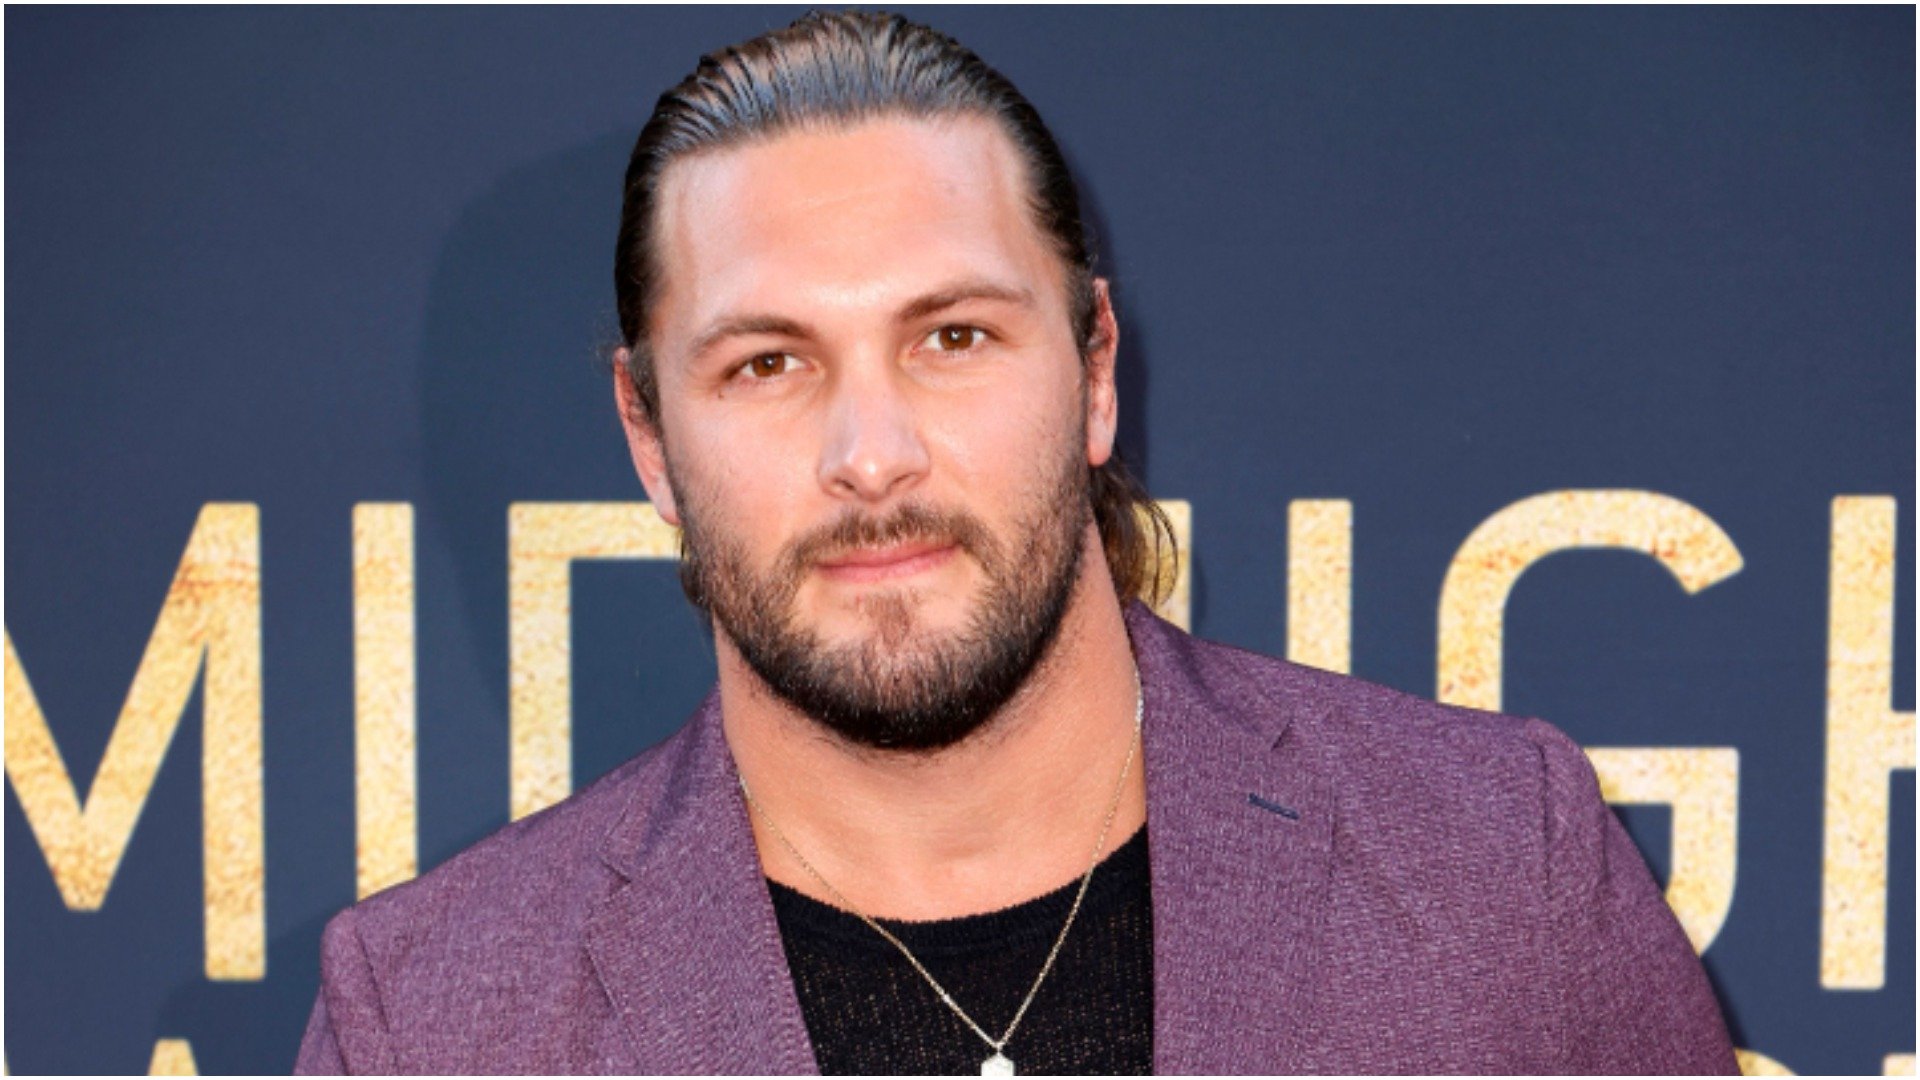 Brock Davies offers more insight into a past domestic violence case that came up on Vanderpump Rules